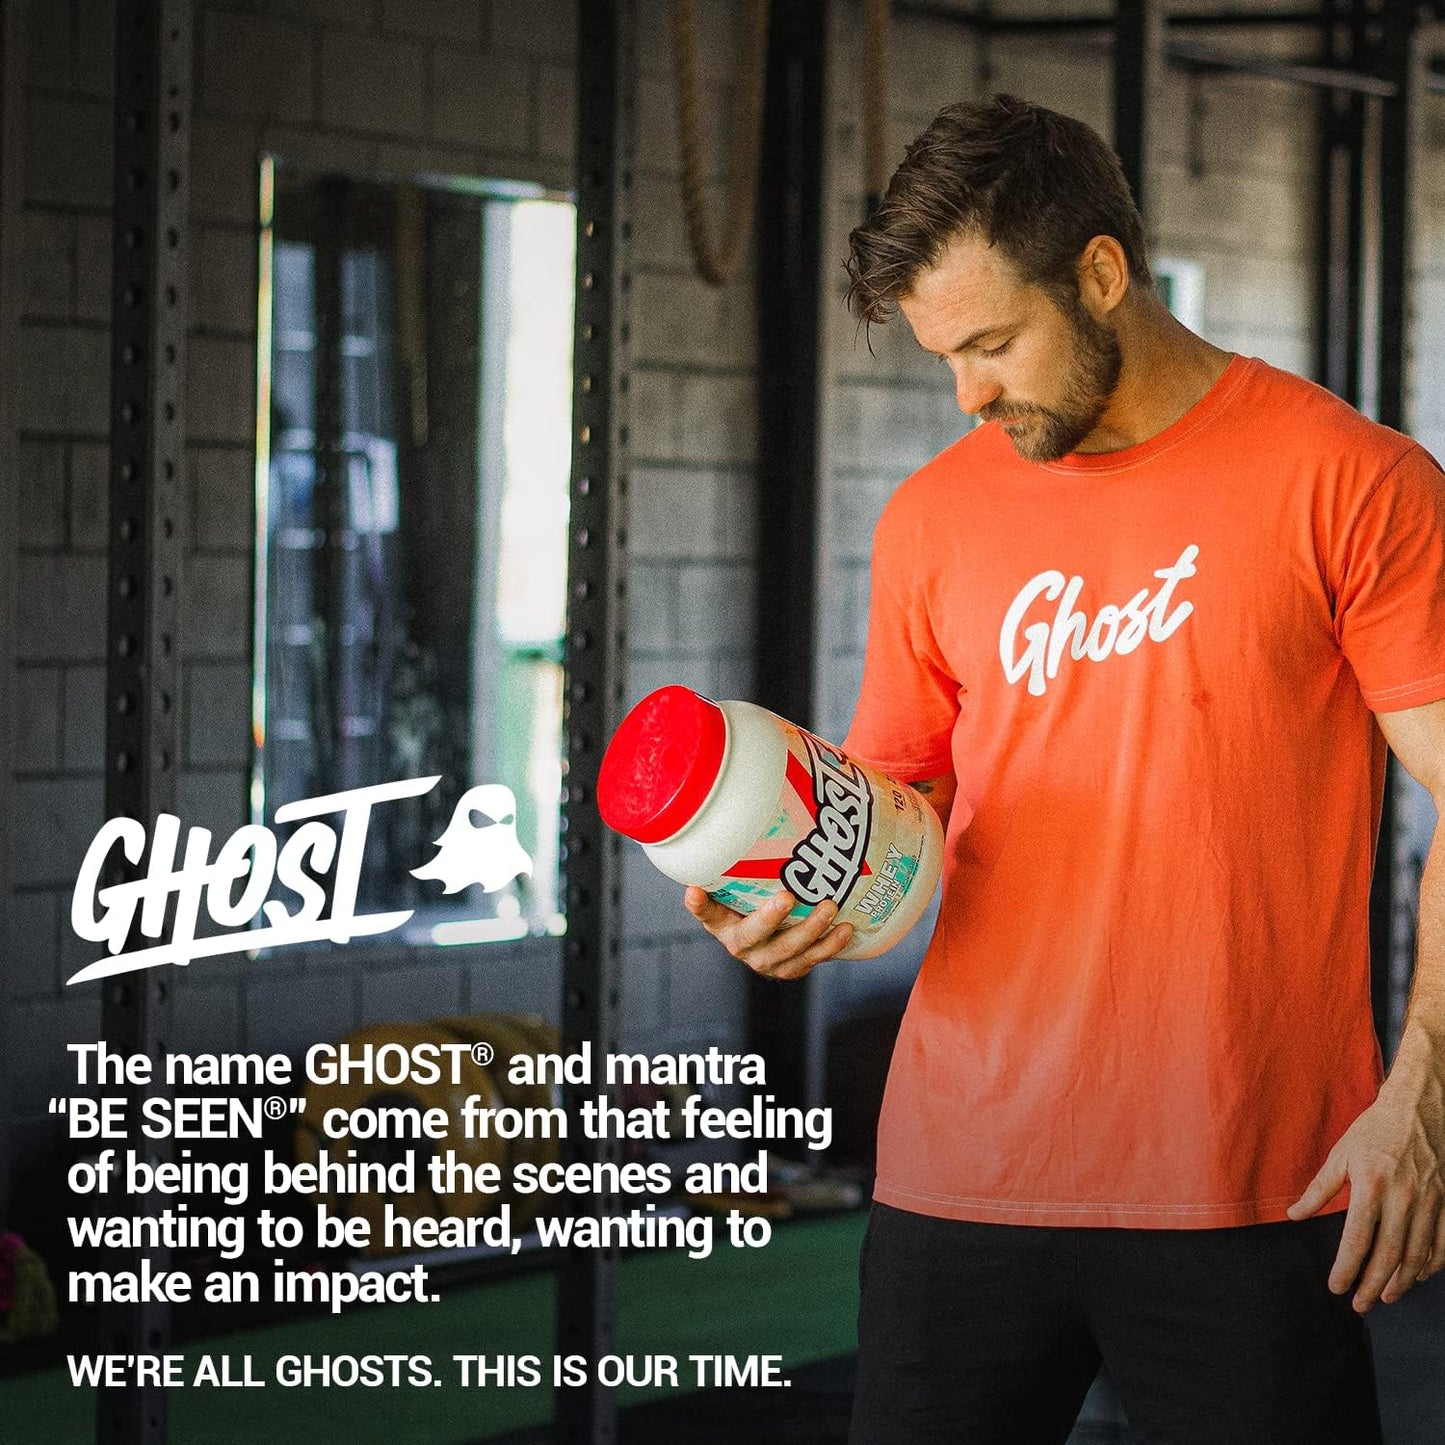 Ghost - Whey Protein Fruity Cereal Milk 924 g